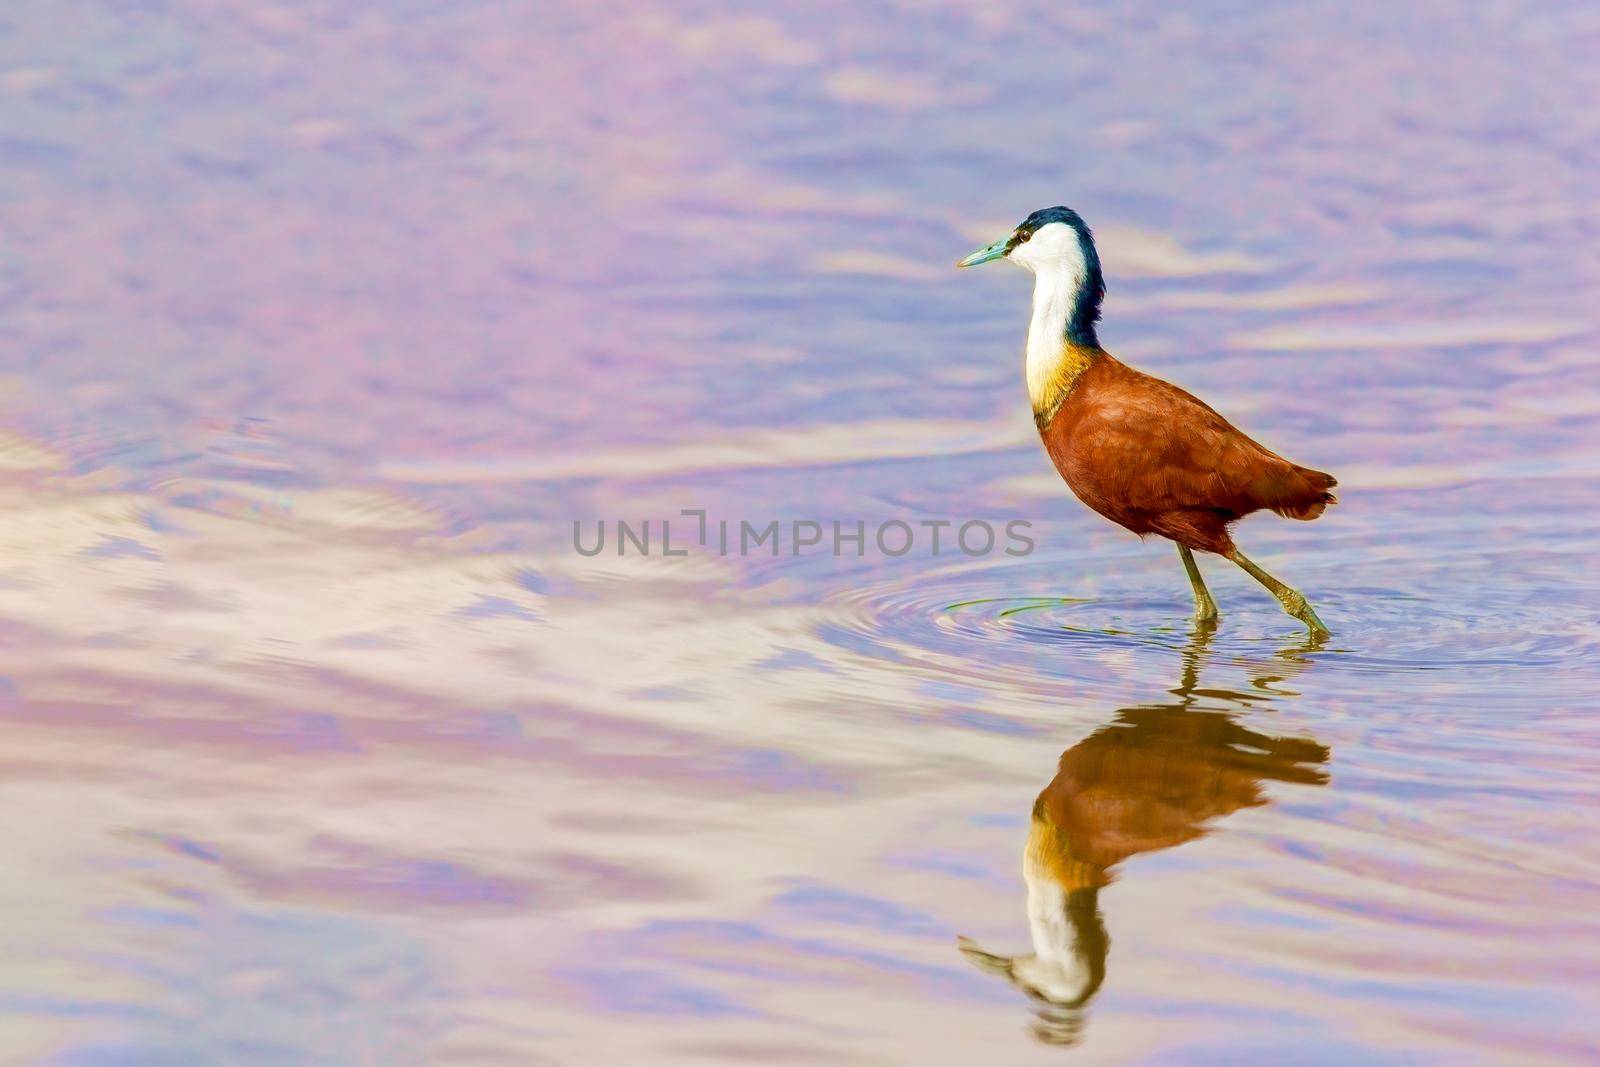 A small bird on long legs walks through the water and hunts for fish. Kenya, a national park. Wild nature.